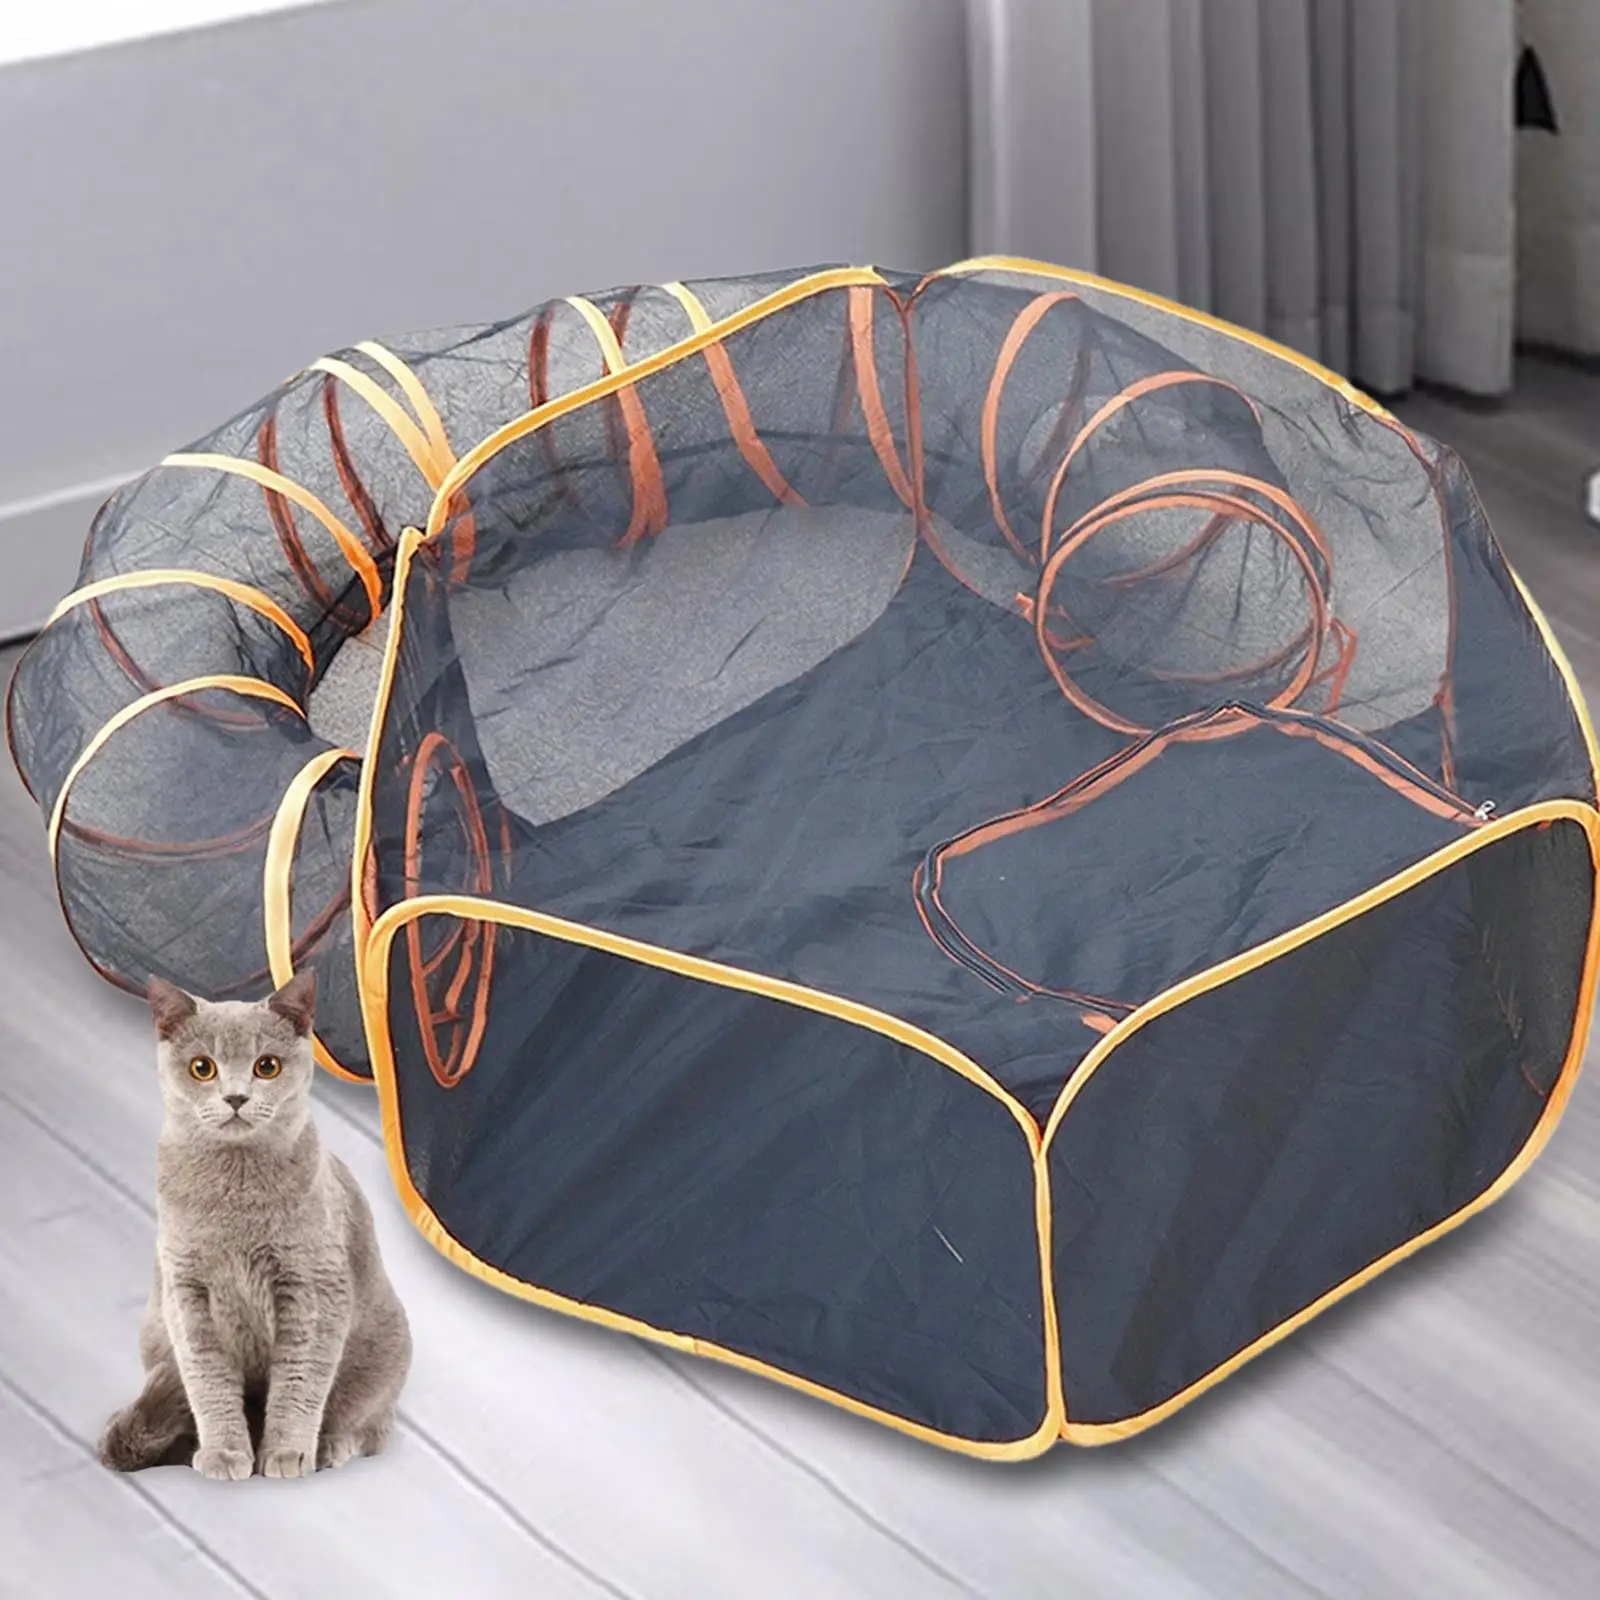 Cat Tunnels Play Center Hideout Cage House Portable Universal Tent Tunnel Cat